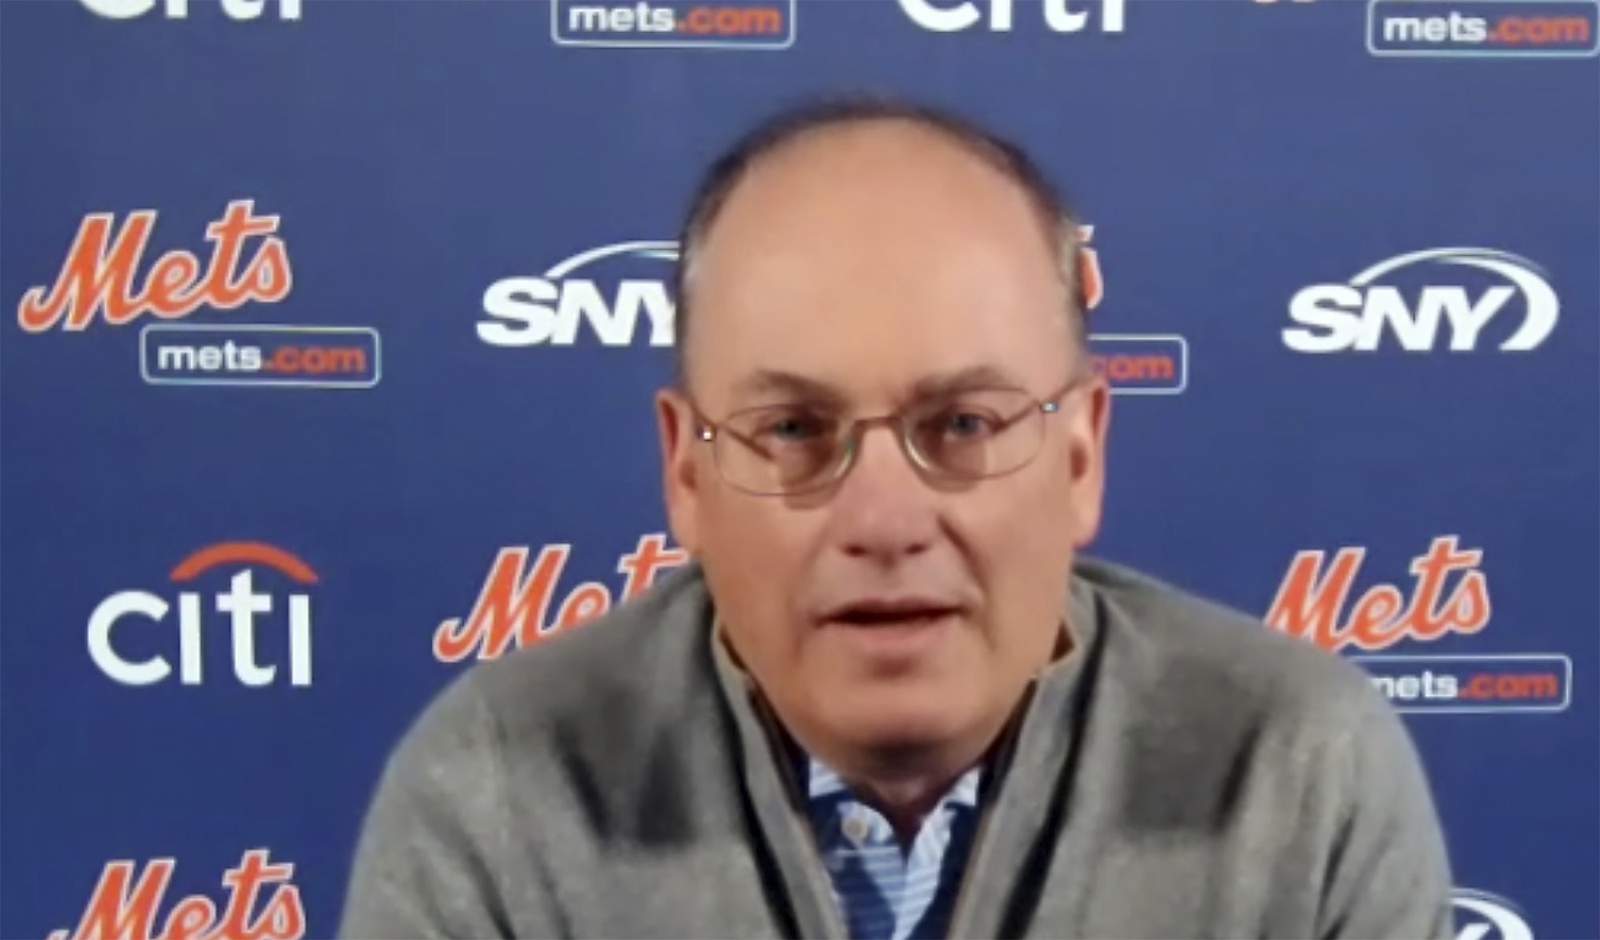 Owner of Mets and hedge fund leaves Twitter, citing threats